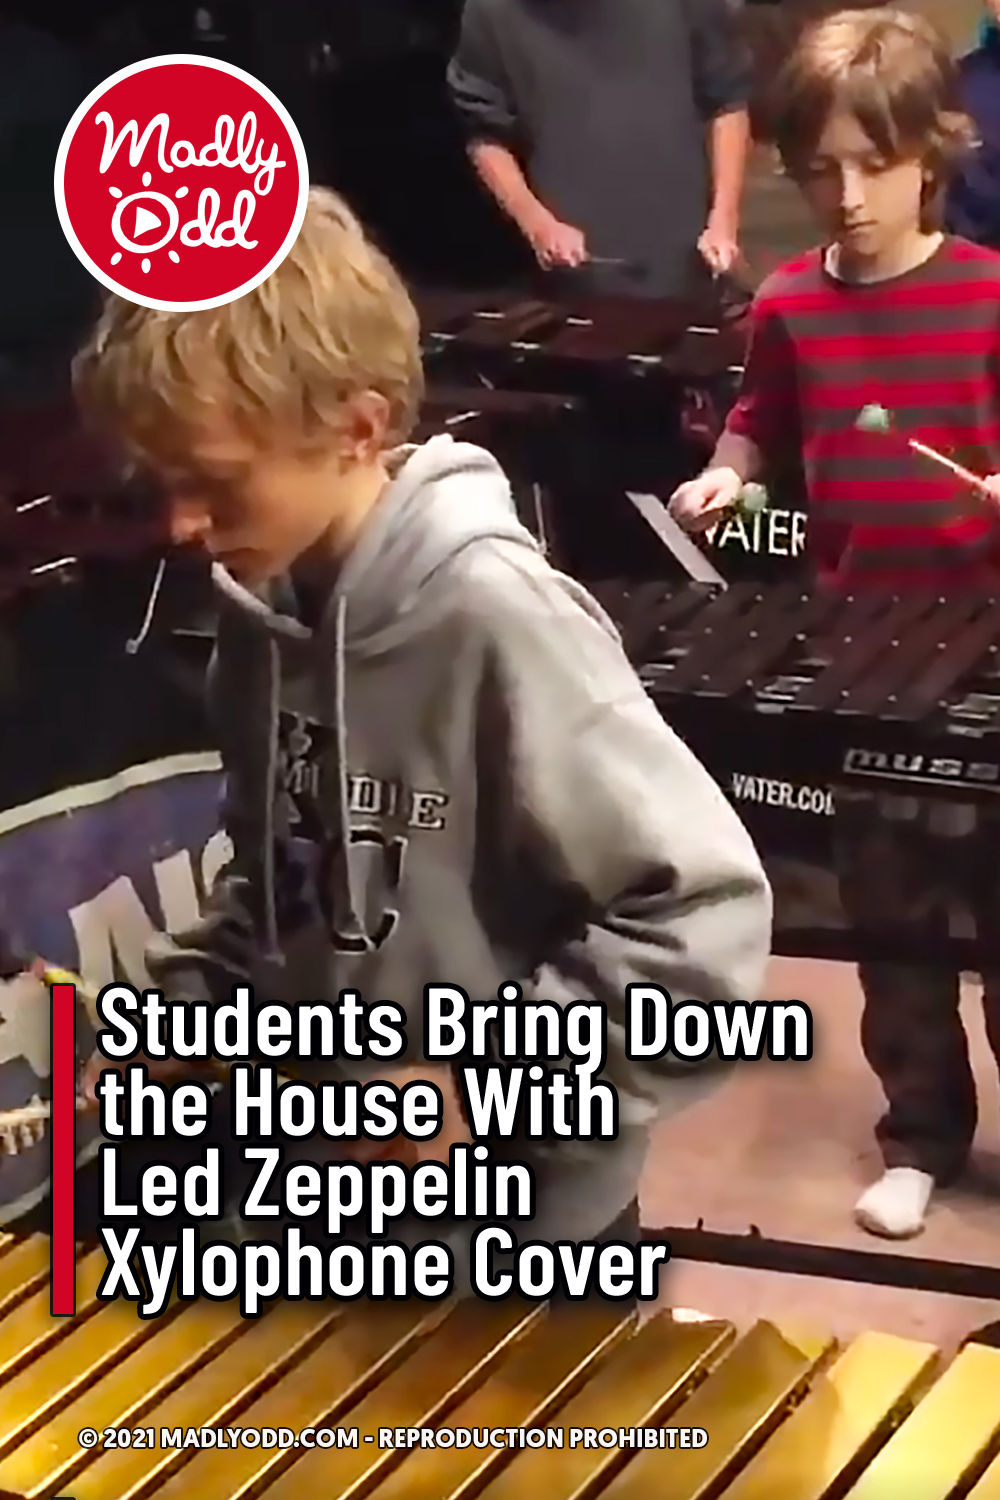 Students Bring Down the House With Led Zeppelin Xylophone Cover